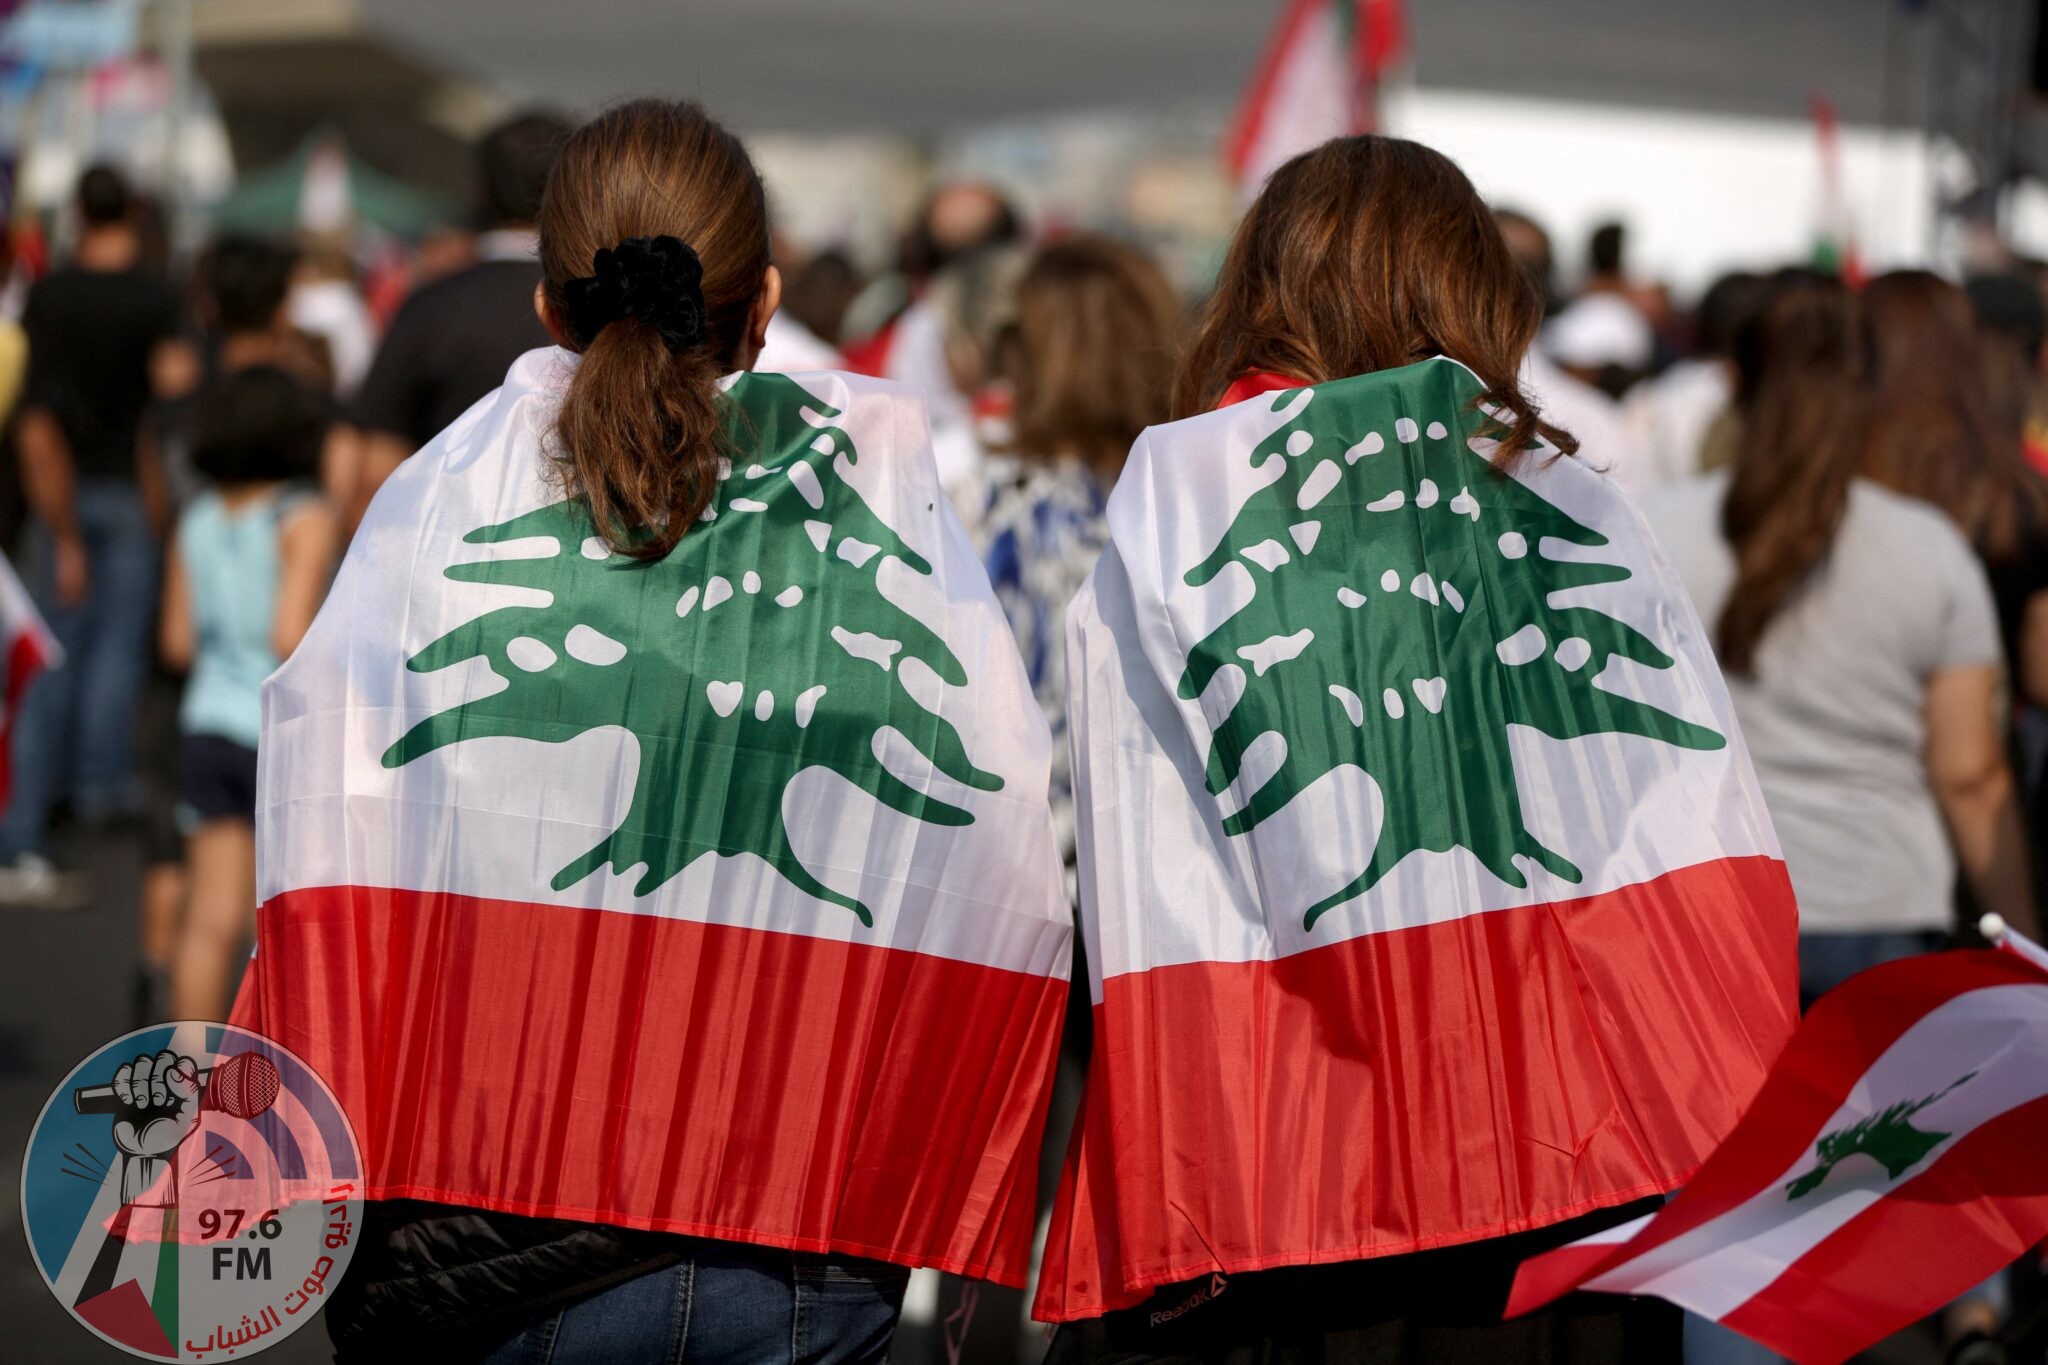 (FILES) In this file photo taken on October 27, 2019, Lebanese protesters wrapped in their national flag take part in a human chain along the coast from north to south as a symbol of unity during ongoing anti-government demonstrations in the area of Jal al-Dib in the northern outskirts of the Lebanese capital Beirut. Two years after a now-defunct protest movement shook Lebanon, opposition activists are hoping parliamentary polls will challenge the ruling elite's stranglehold on the country. (Photo by Patrick BAZ / AFP)